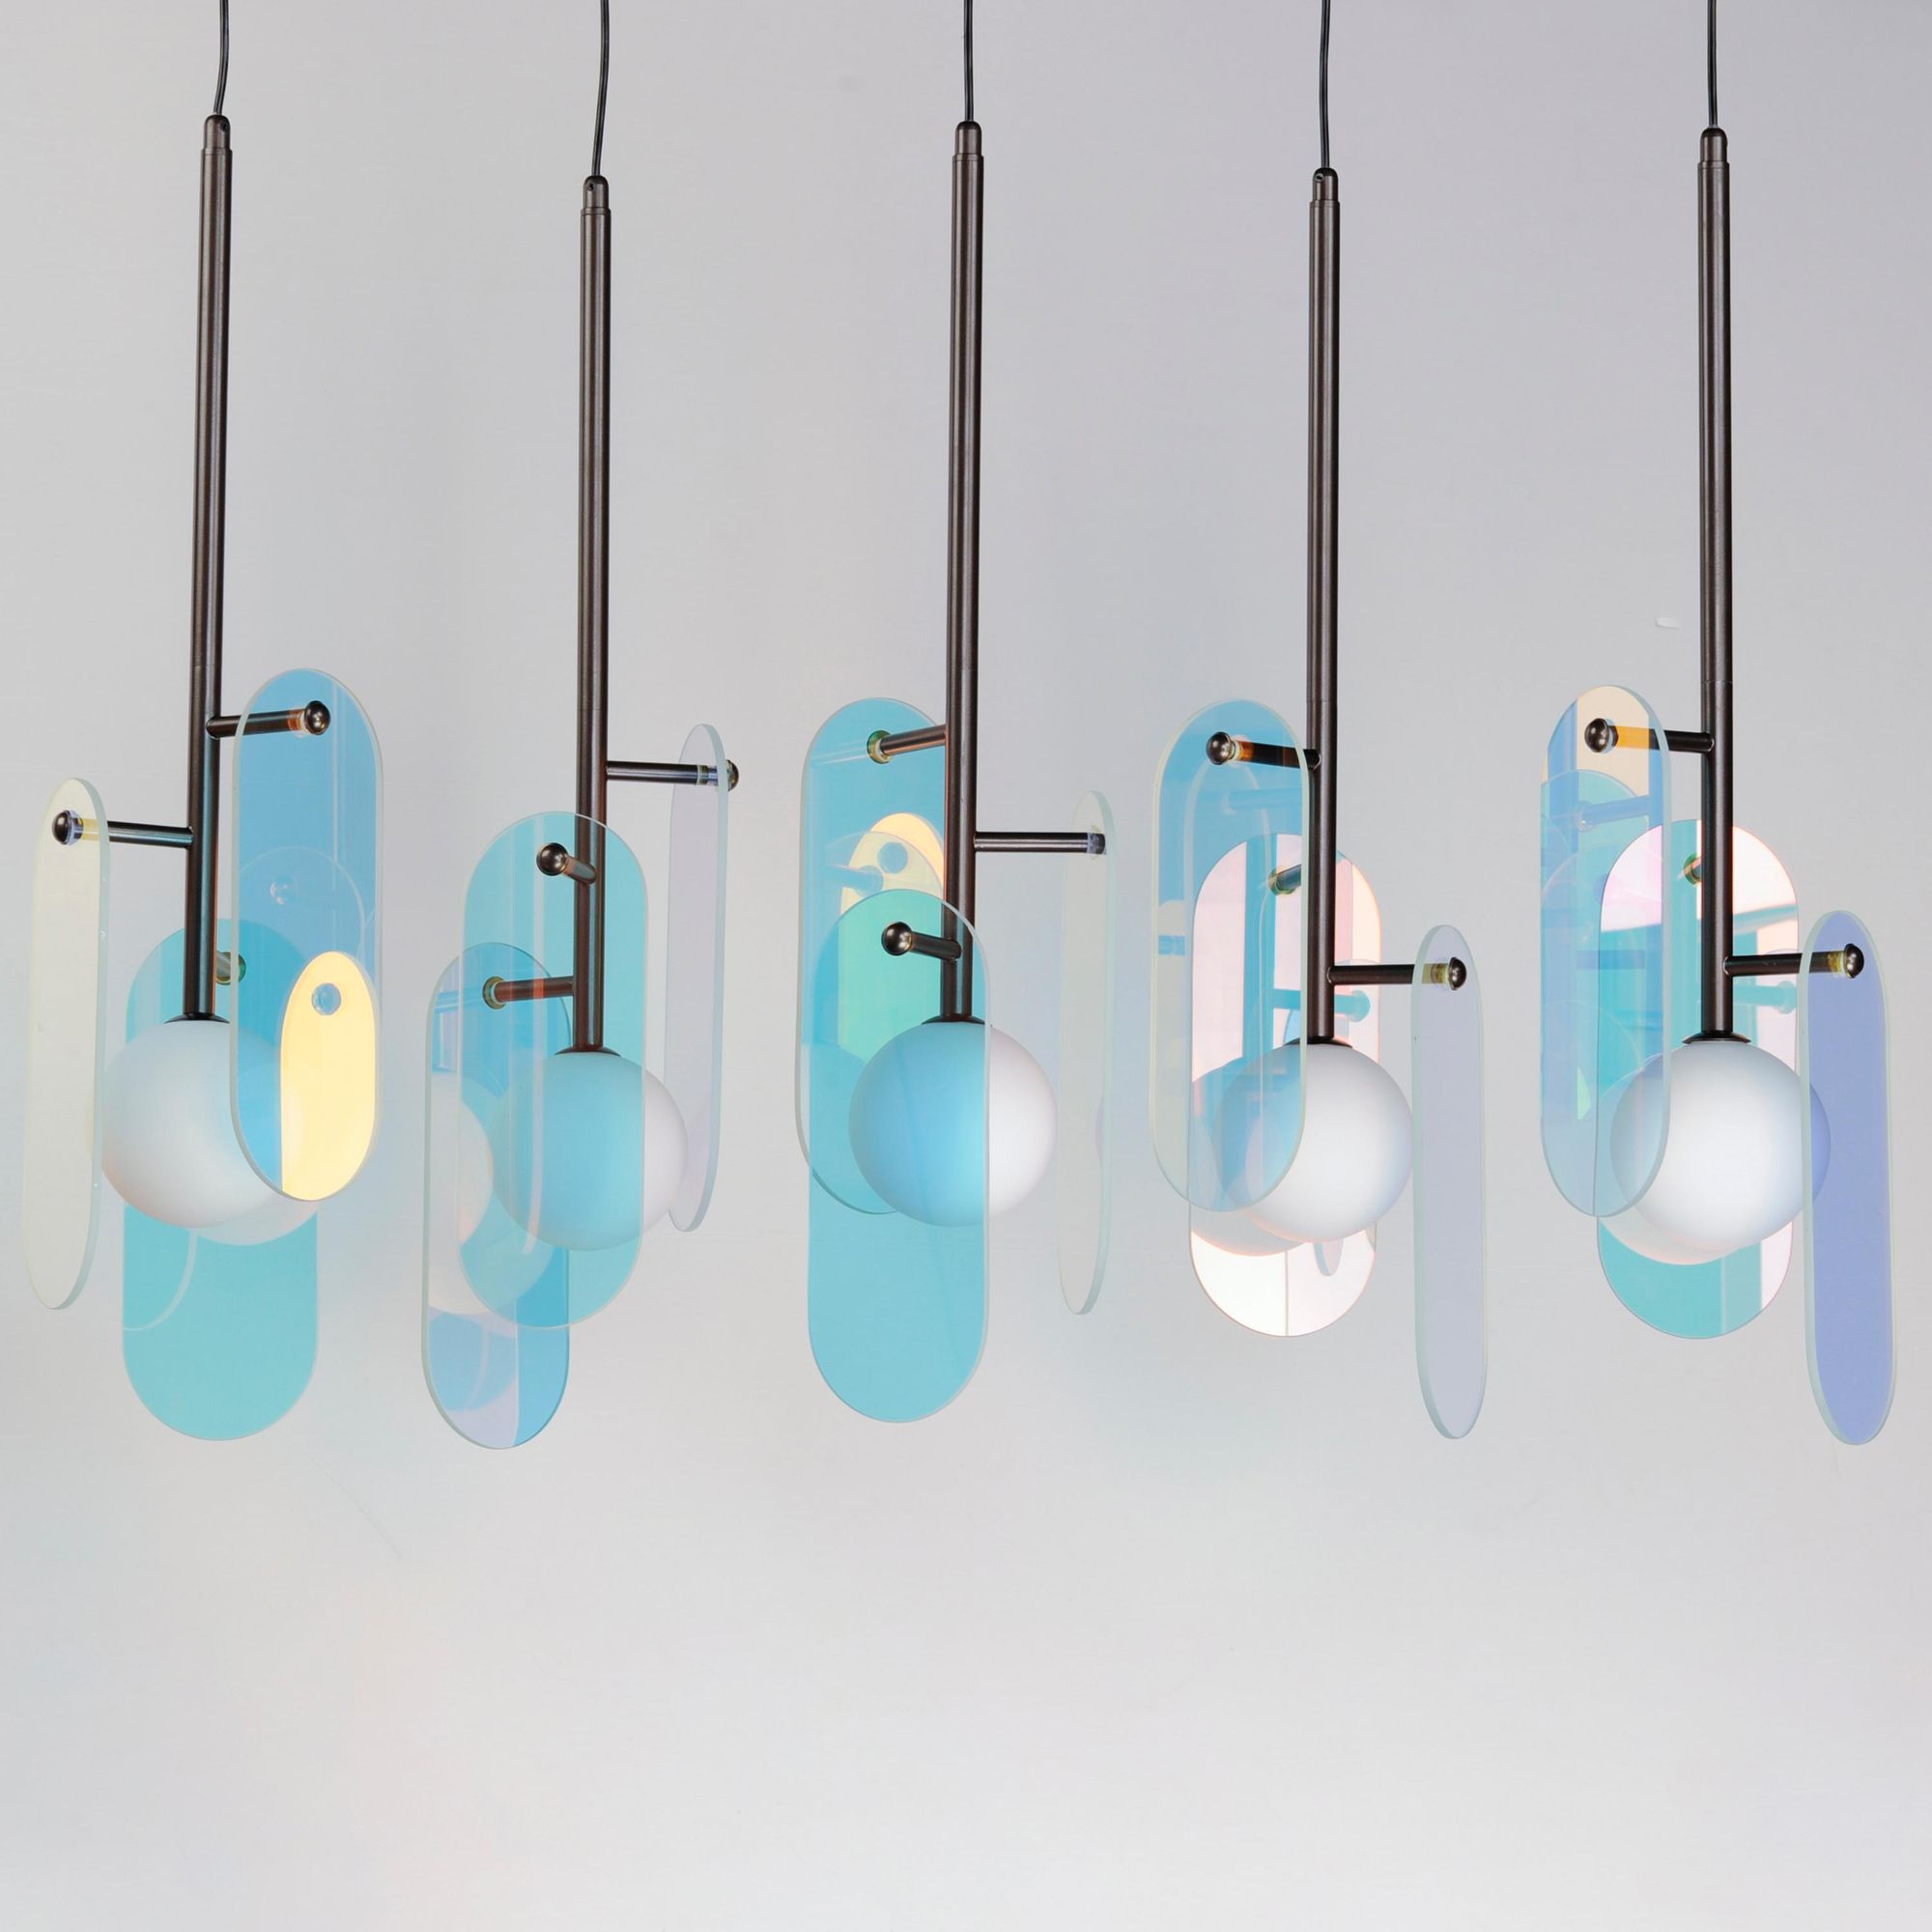 Studio M SM24815DCBBZ Megalith 5-Light Pendant Dichroic Glass in Brushed Bronze by Nina Magon